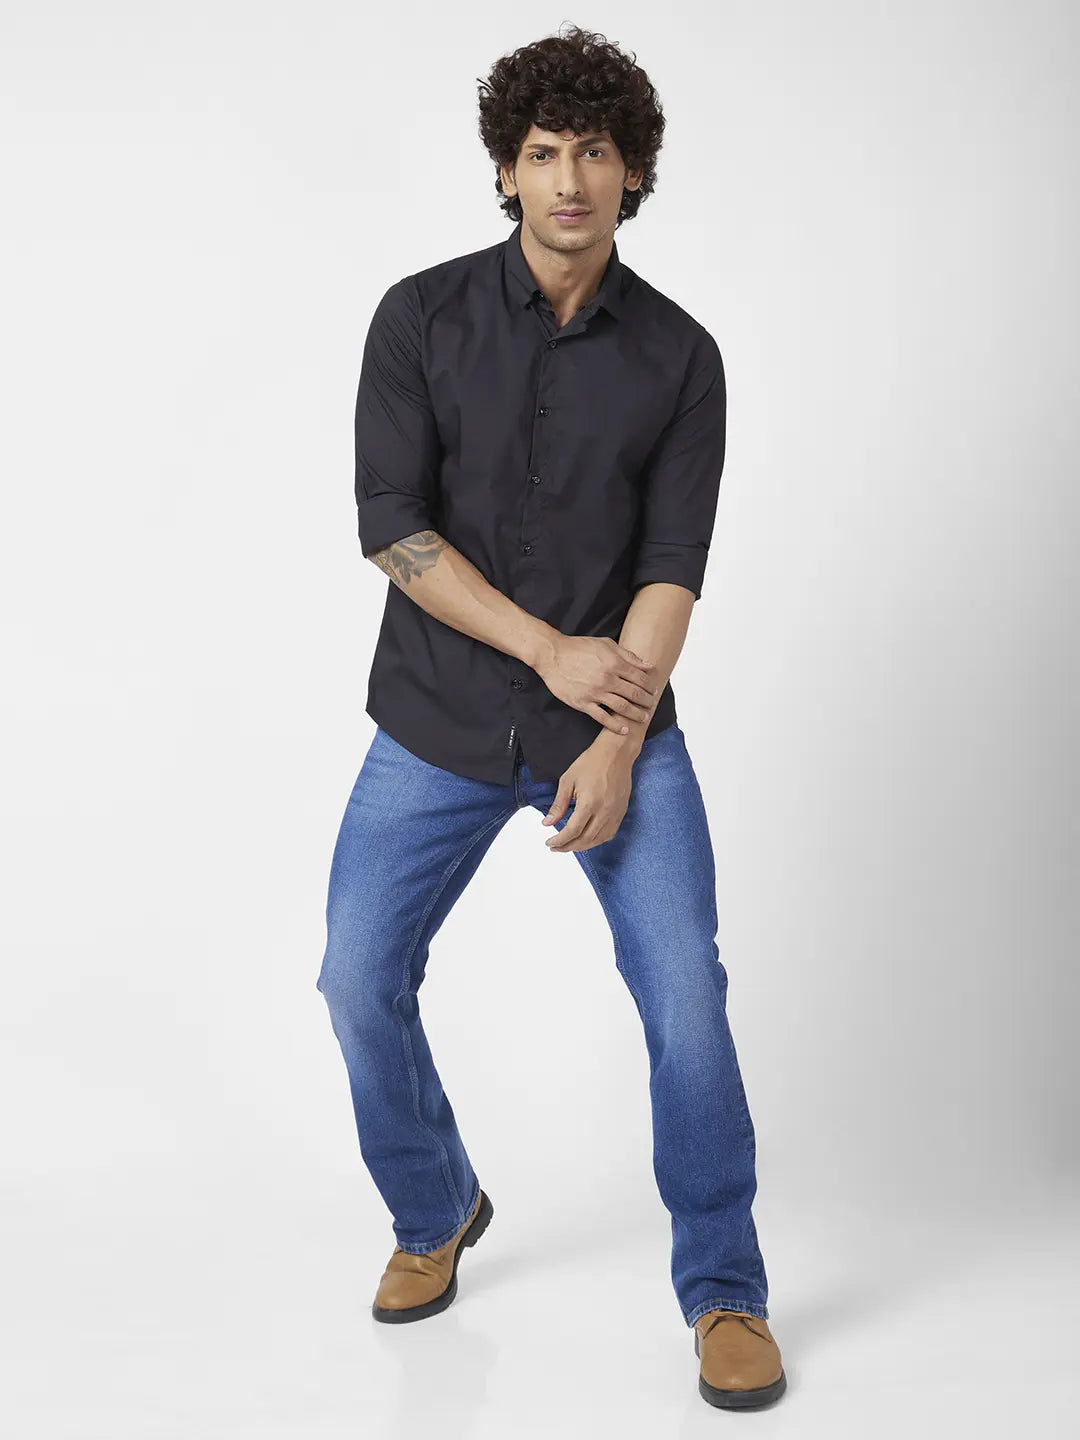 How to style a black shirt and blue jeans - Quora